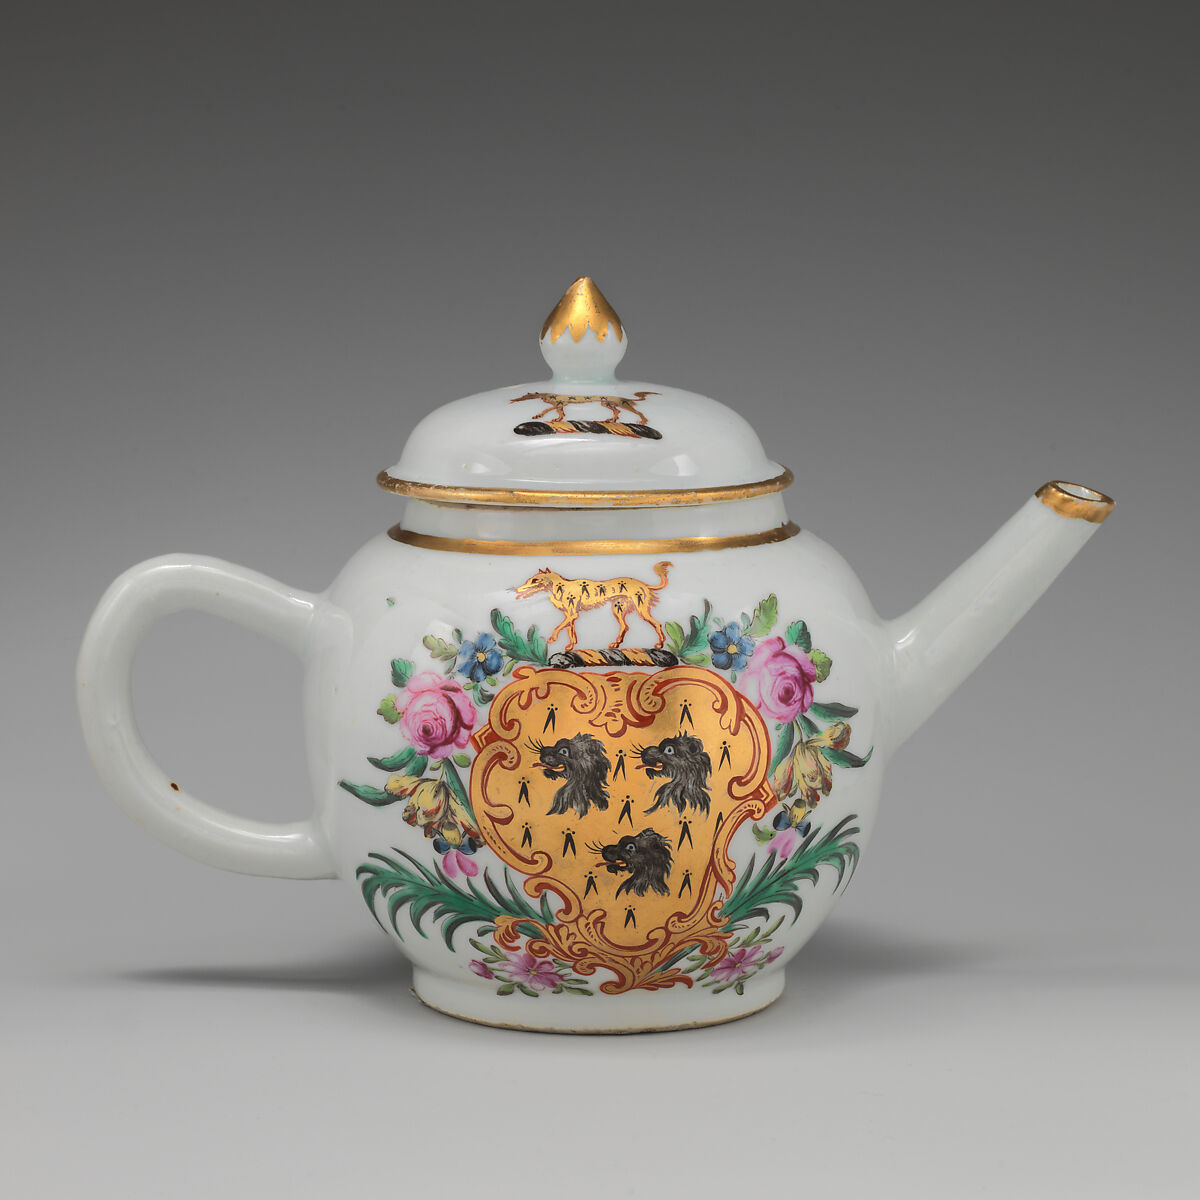 Teapot with armorial decoration (part of a service), Decoration possibly by James Giles (British, 1718–1780), Hard-paste porcelain with enamel decoration and gilding, Chinese with British decoration 